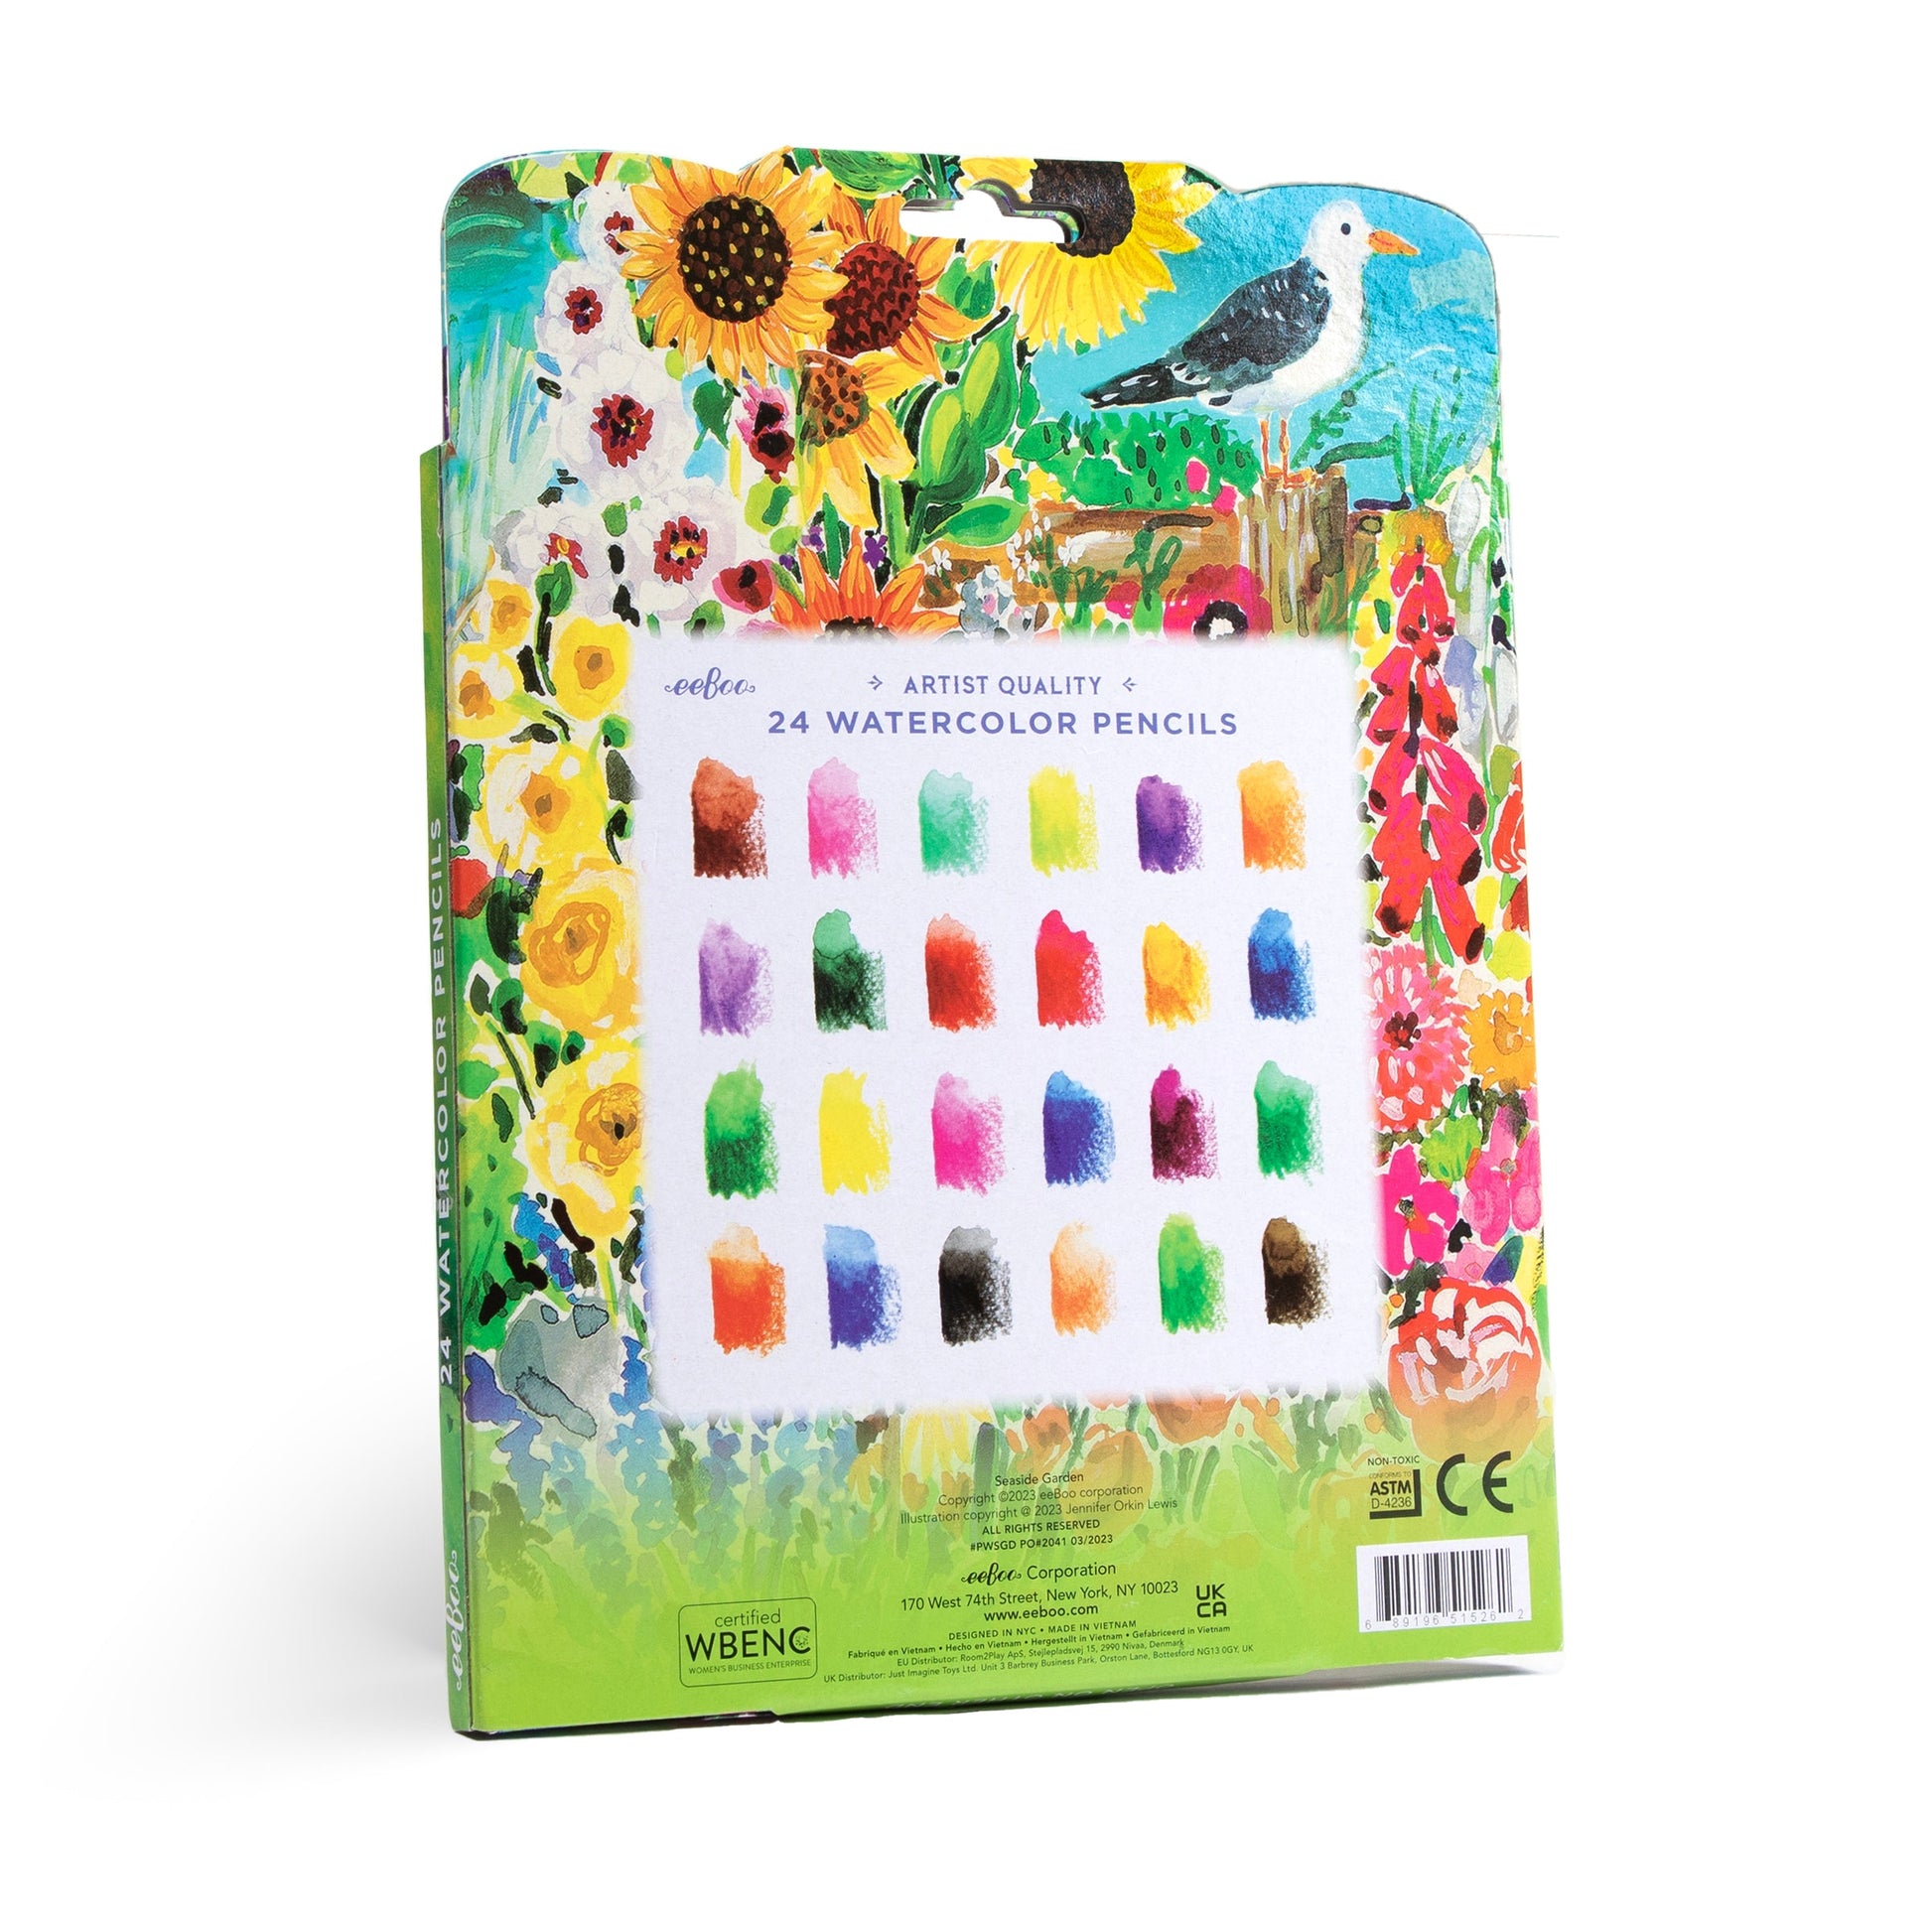  Seaside Garden 24 Watercolor Pencils | Unique Great Gifts for Kids & Adults 